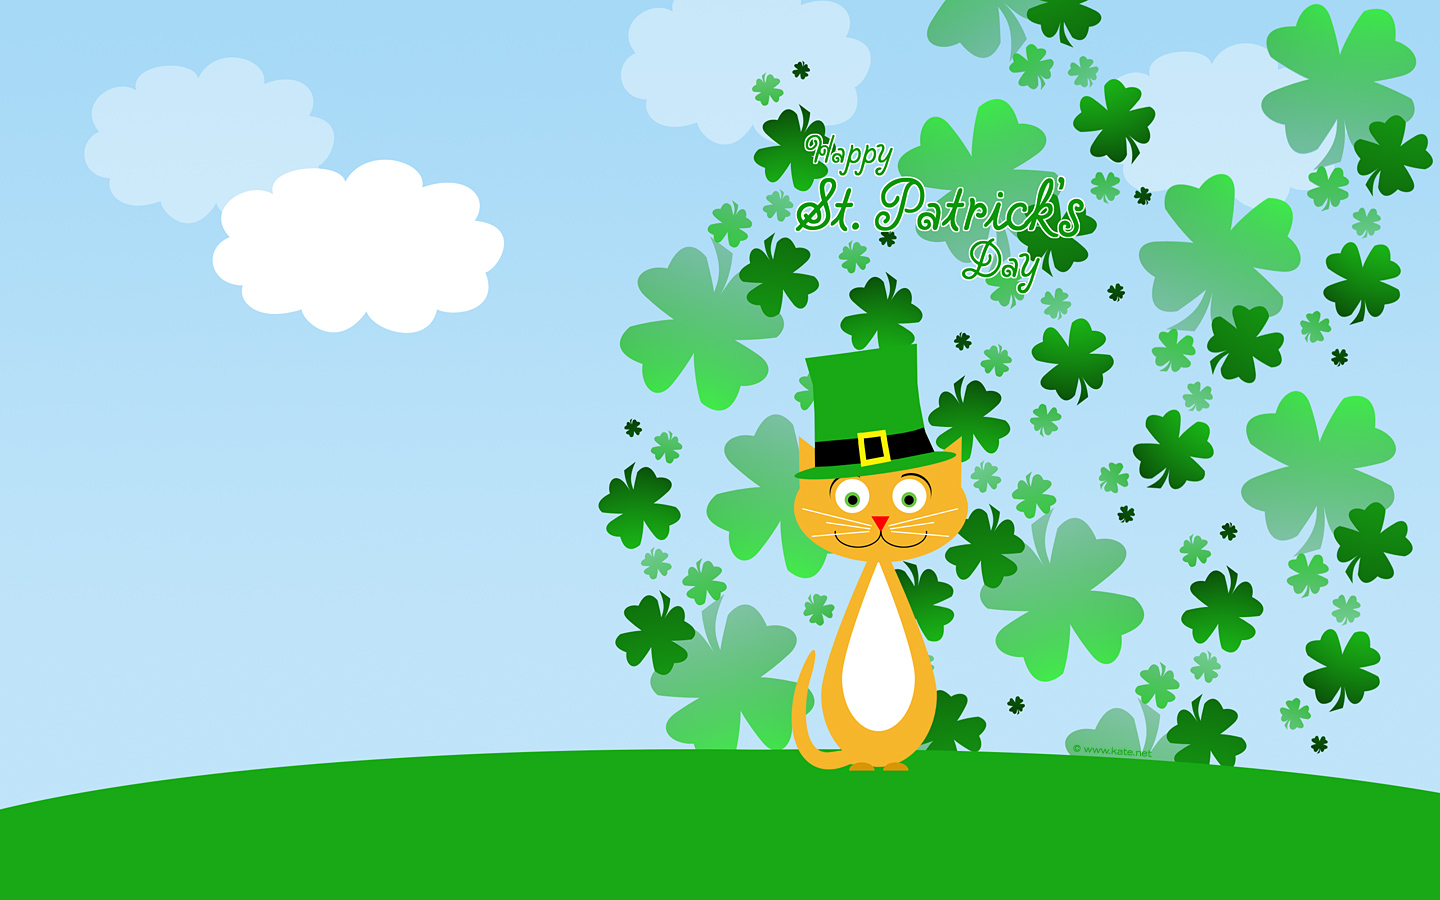 St Patricks Day Wallpaper   Miscellaneous Photos and Wallpapers 1440x900